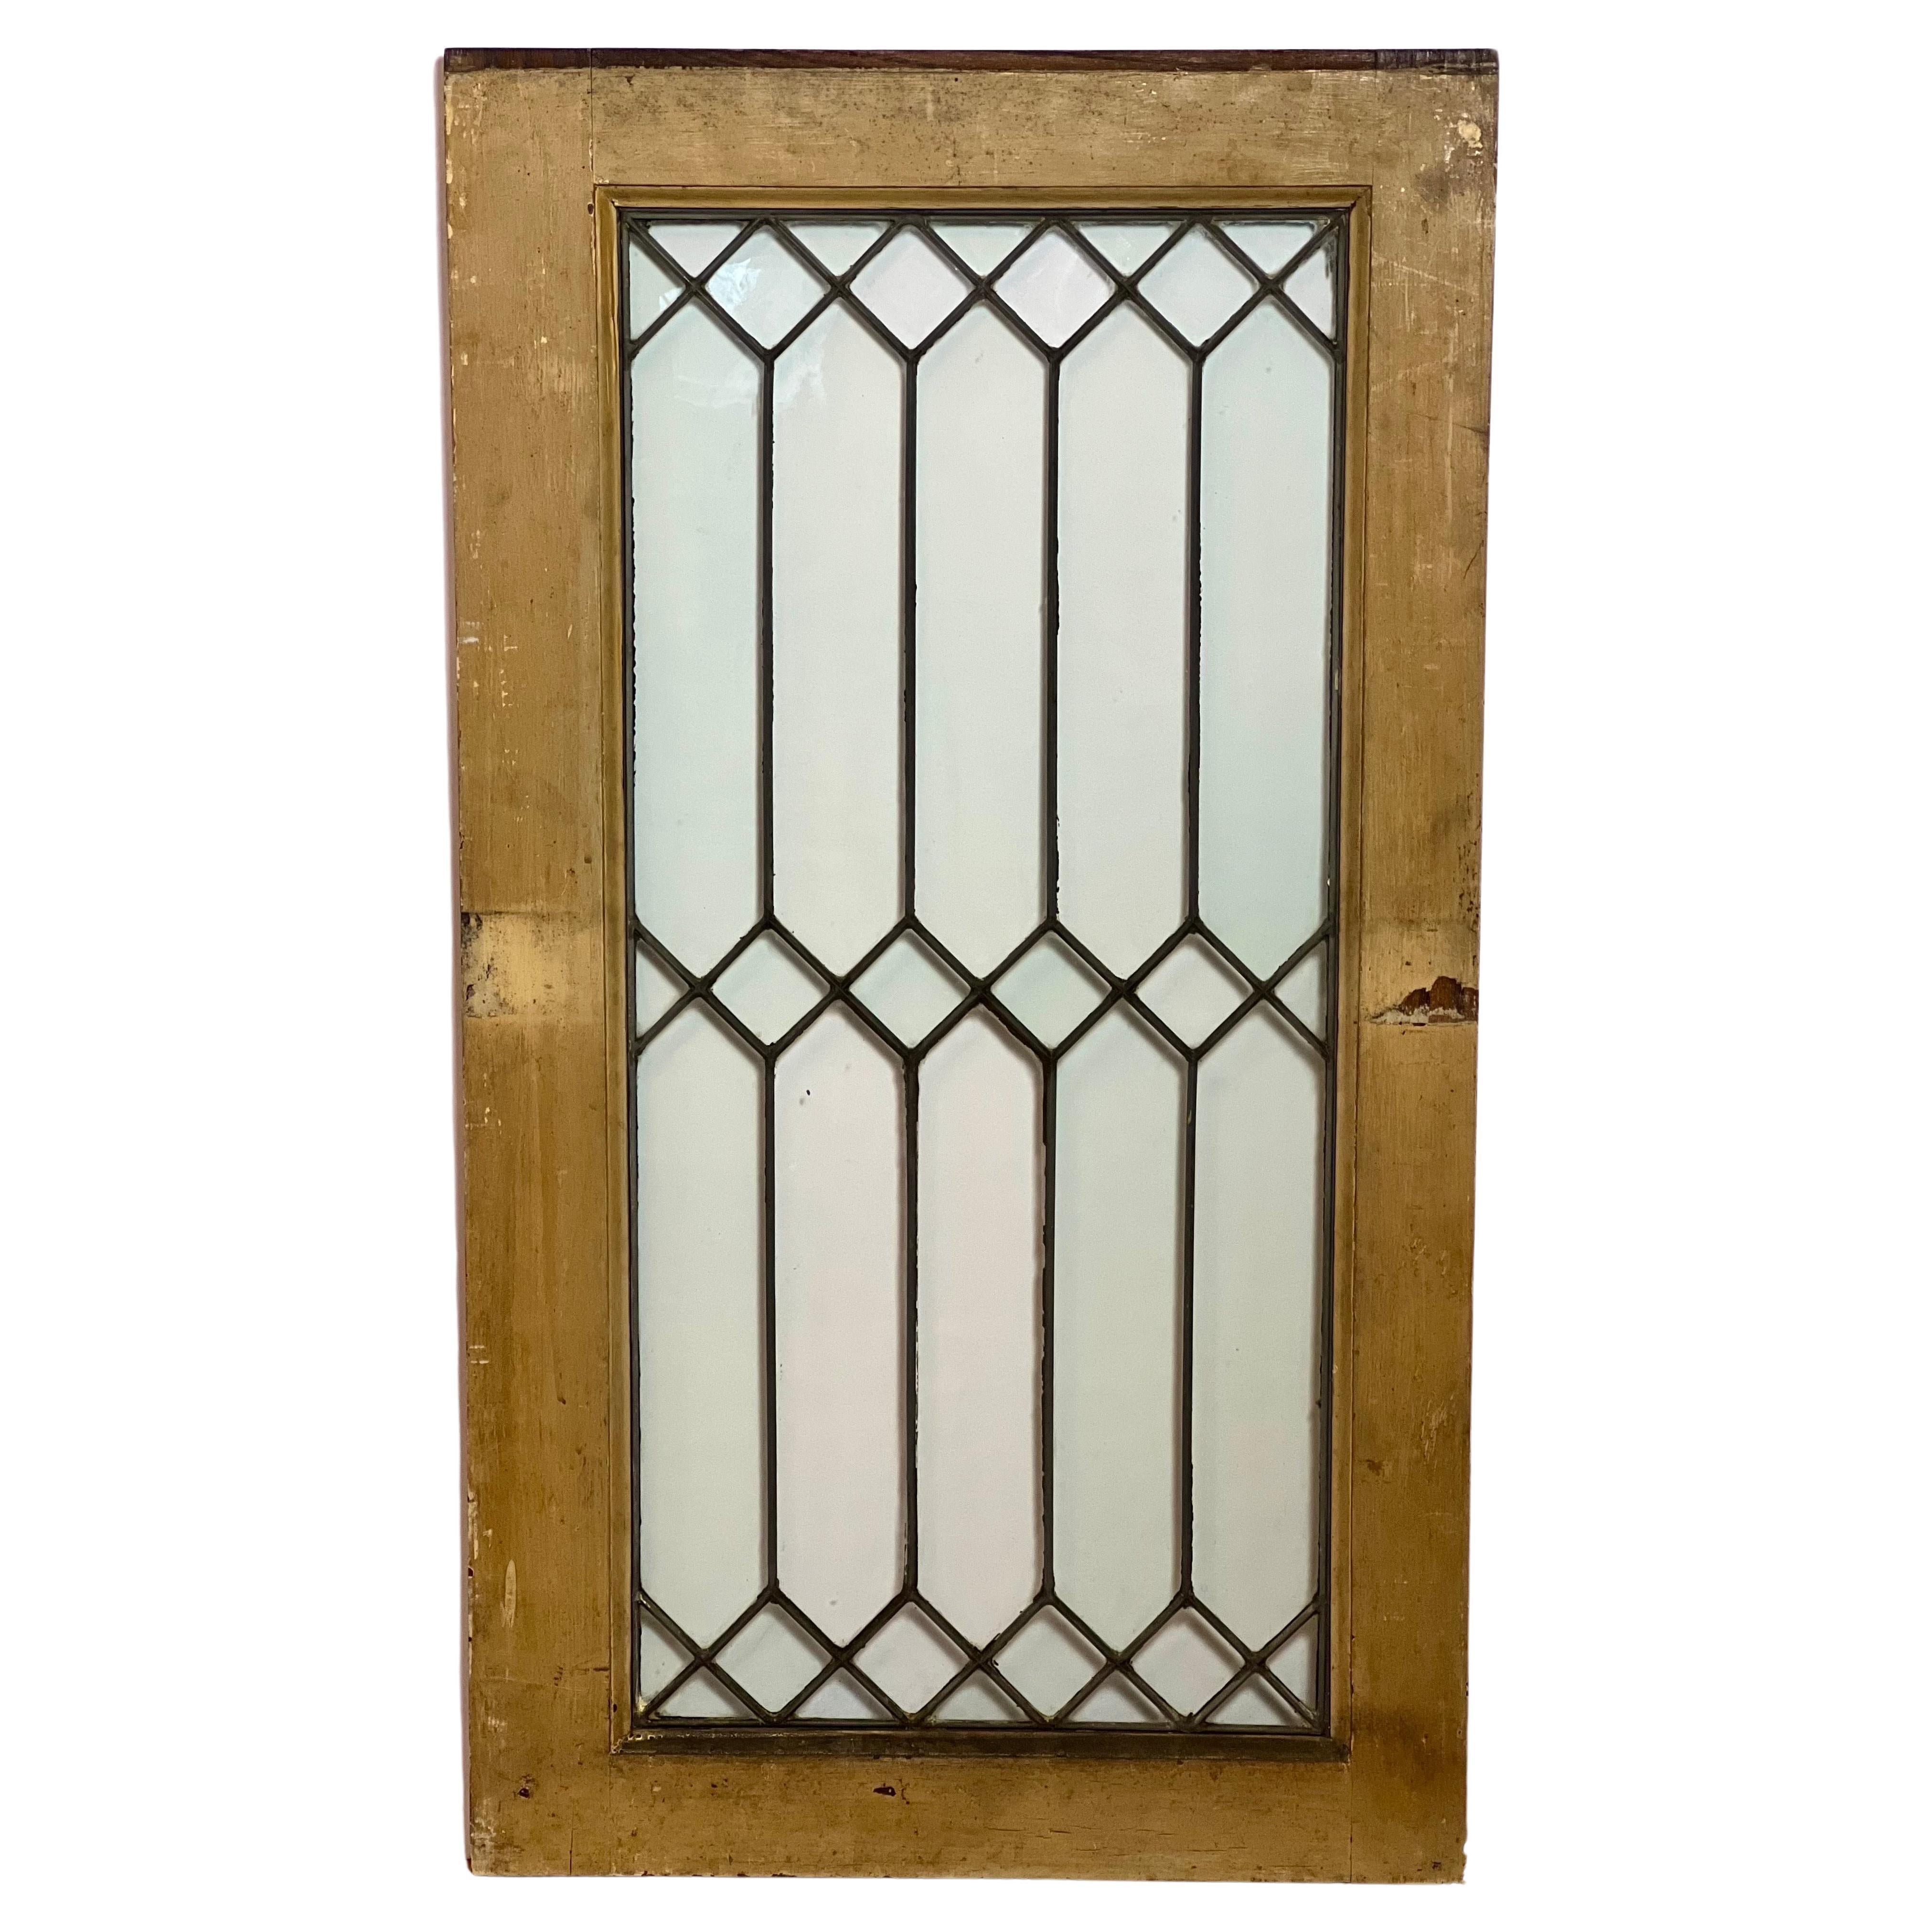 Antique Clear Leaded Glass Window with Wood Frame